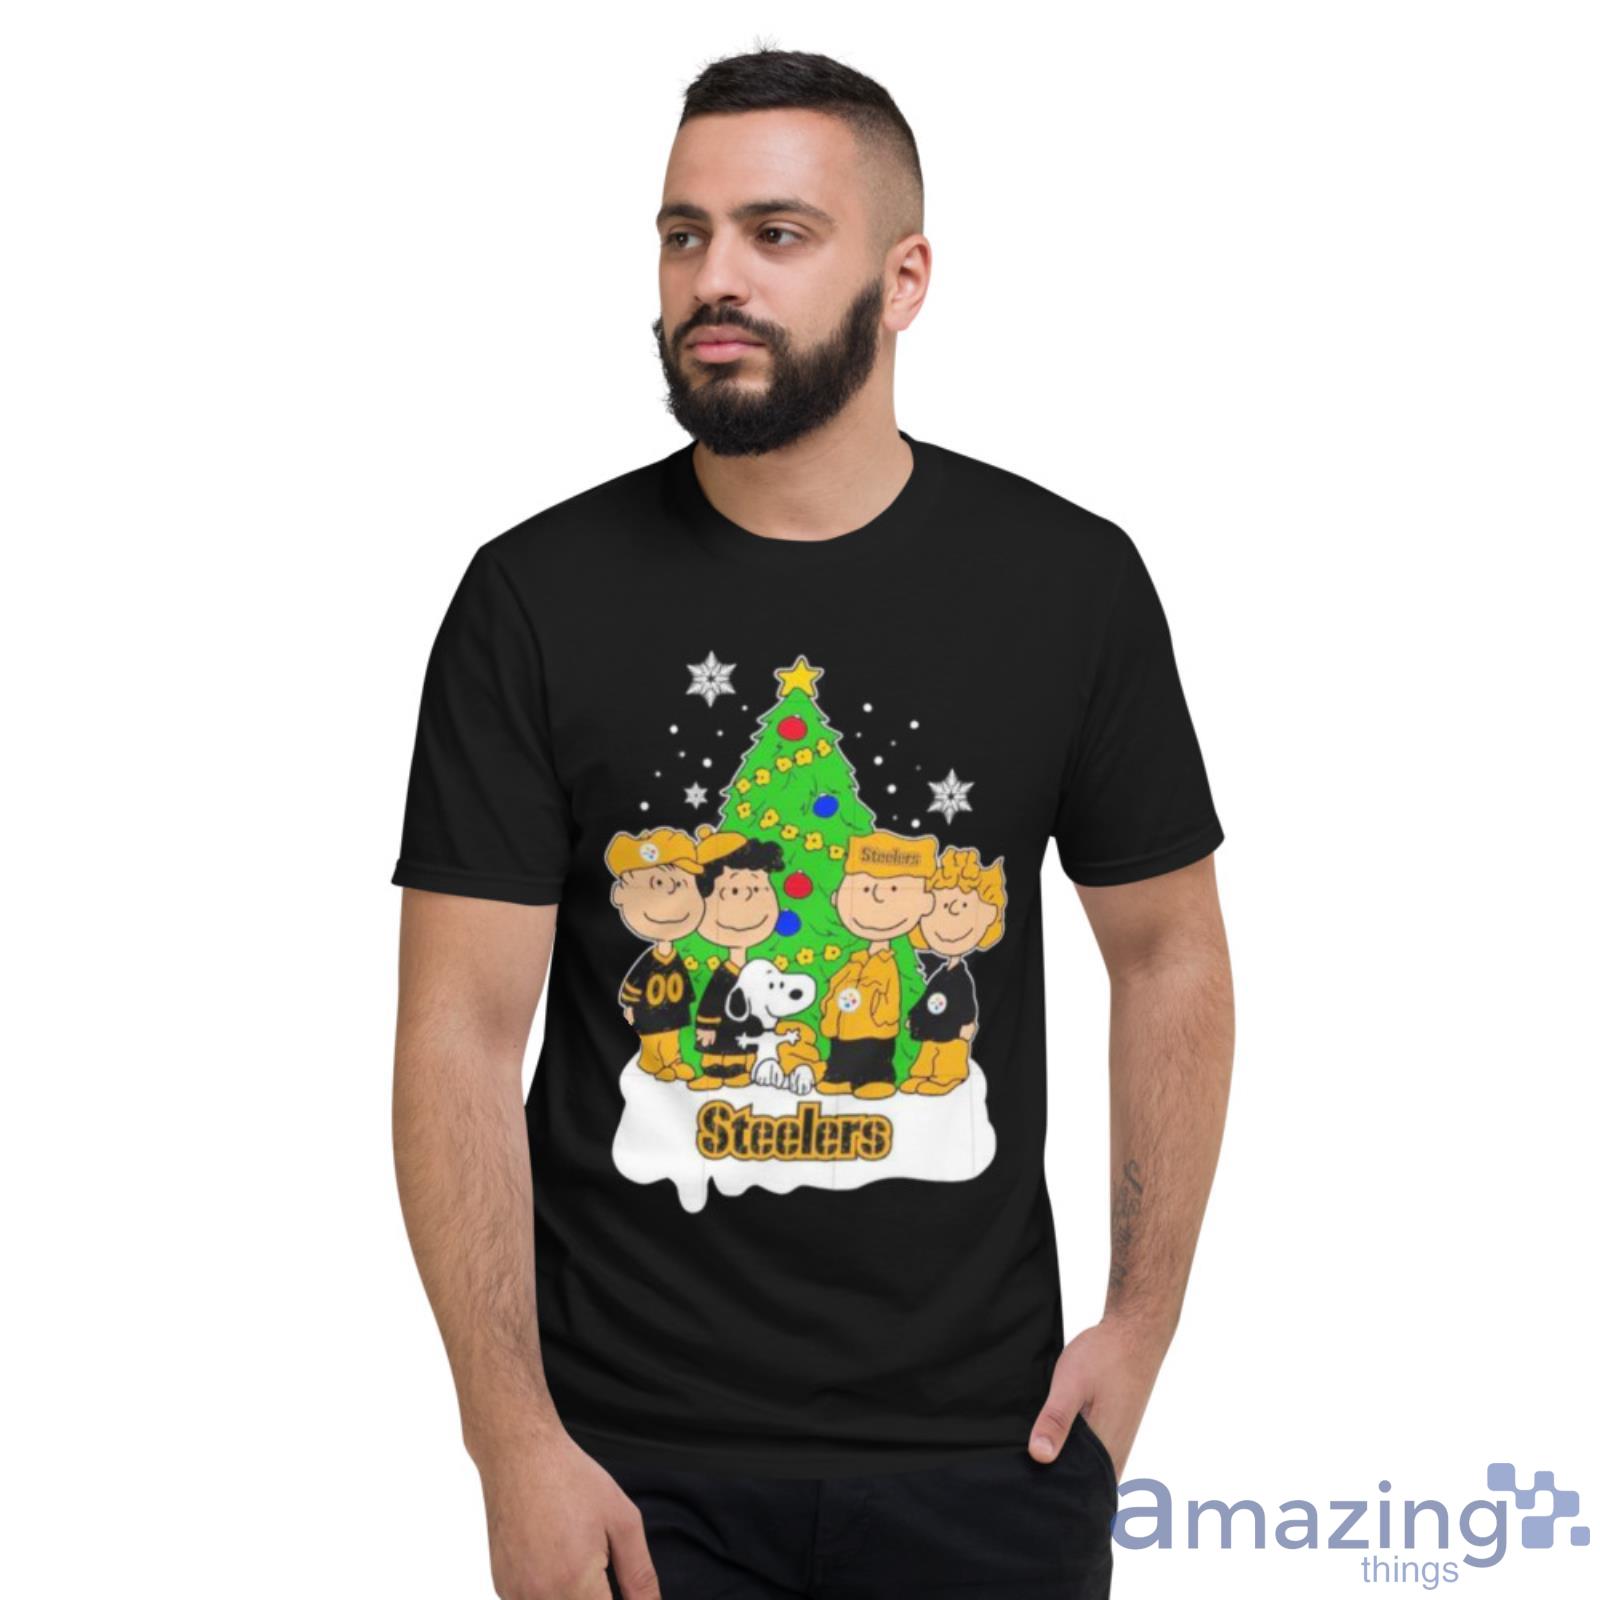 Snoopy The Peanuts Pittsburgh Steelers Christmas Shirt